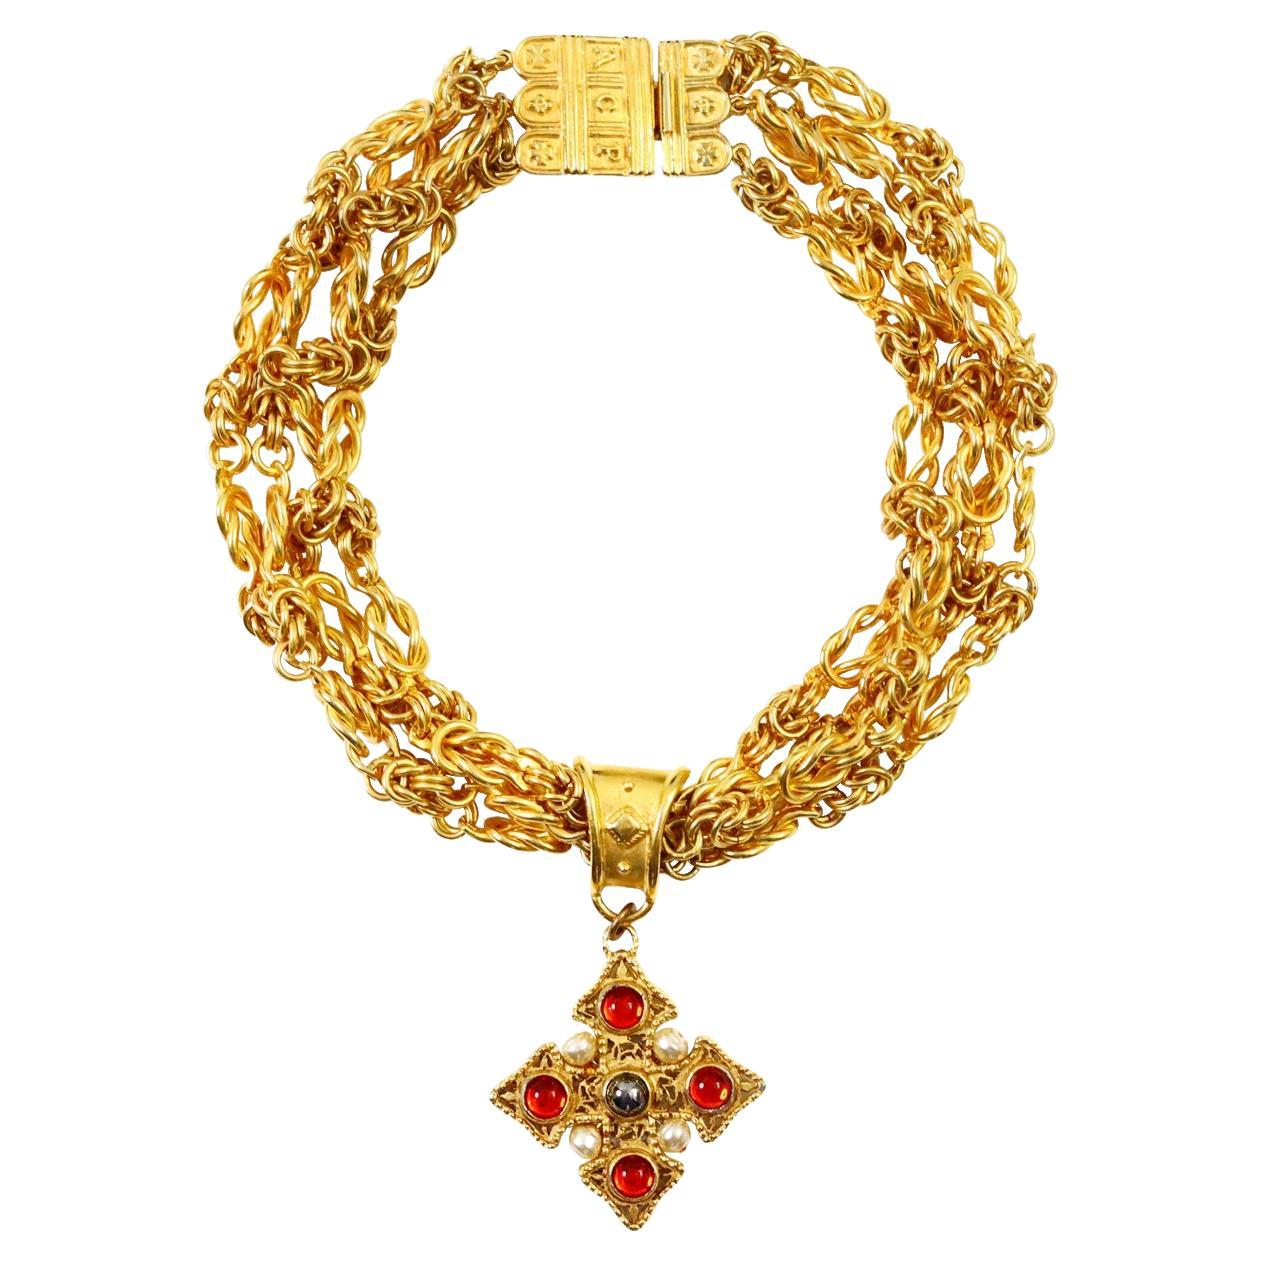 Vintage Prevost Gold 4 Strand Necklace with Dangling Maltese Cross Circa 1980s